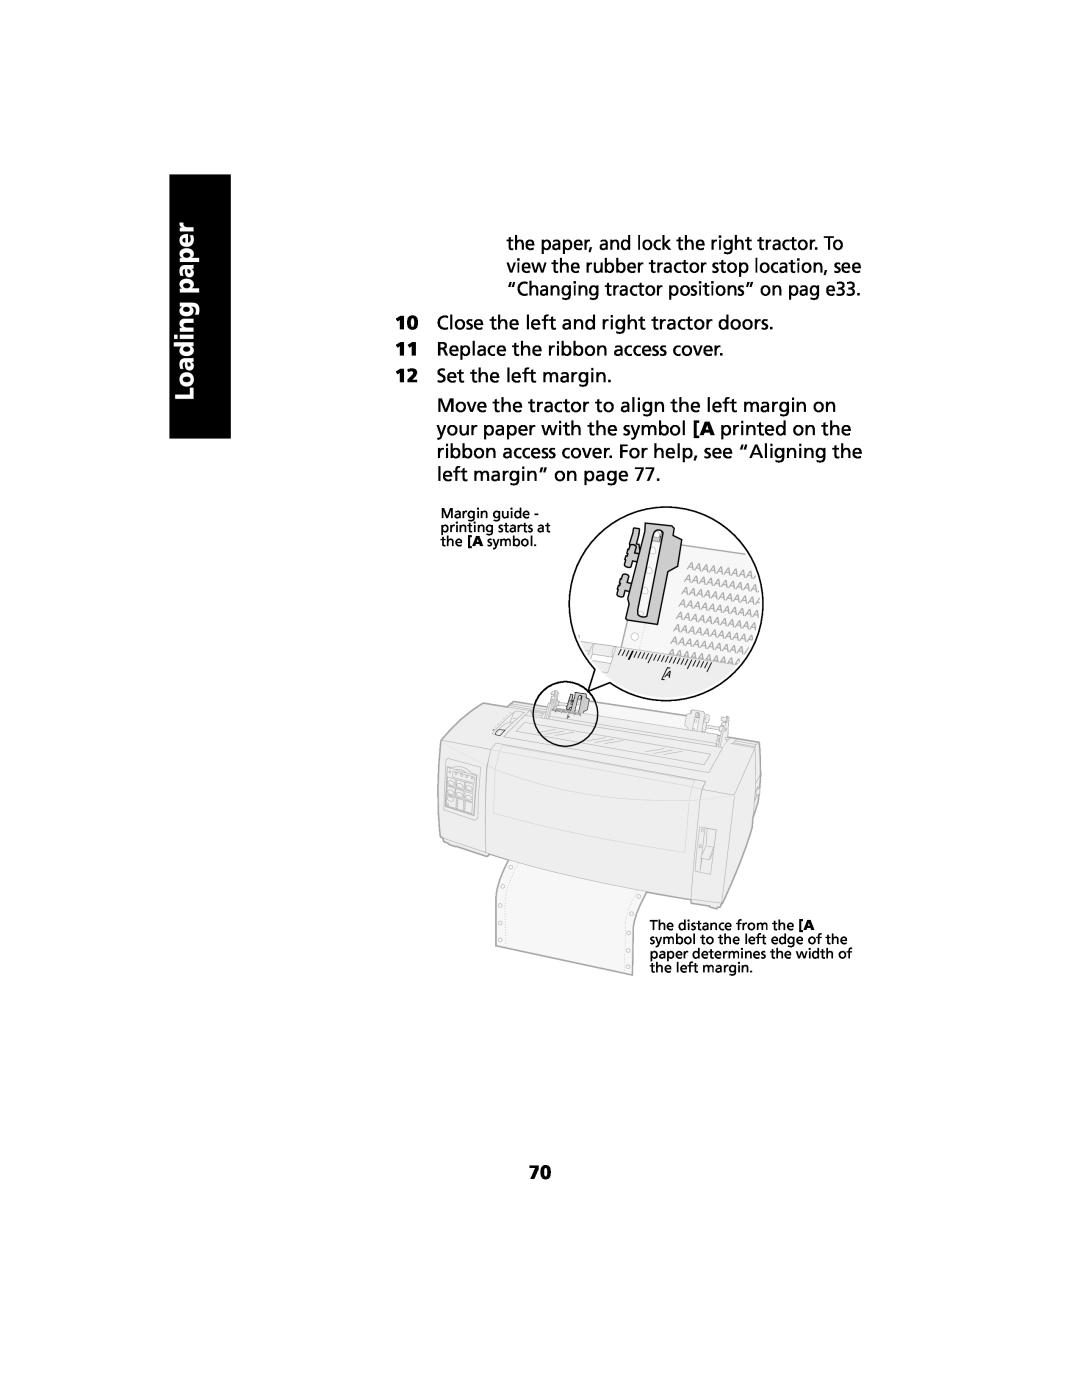 Lexmark 2480 manual Loading paper, Close the left and right tractor doors 